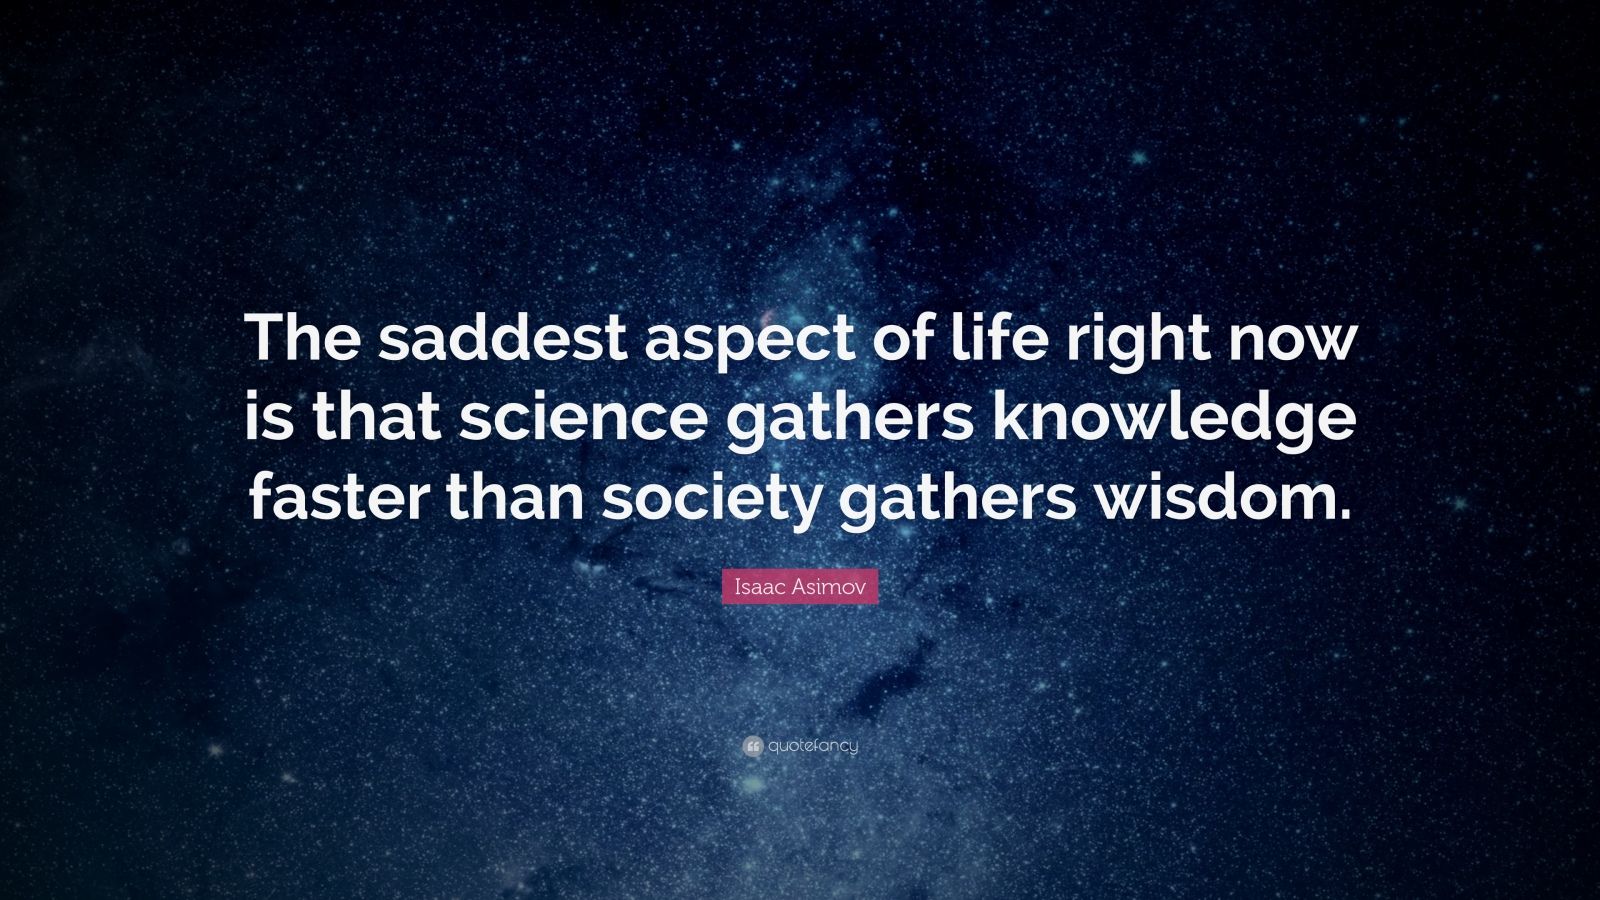 28639 Isaac Asimov Quote The saddest aspect of life right now is that